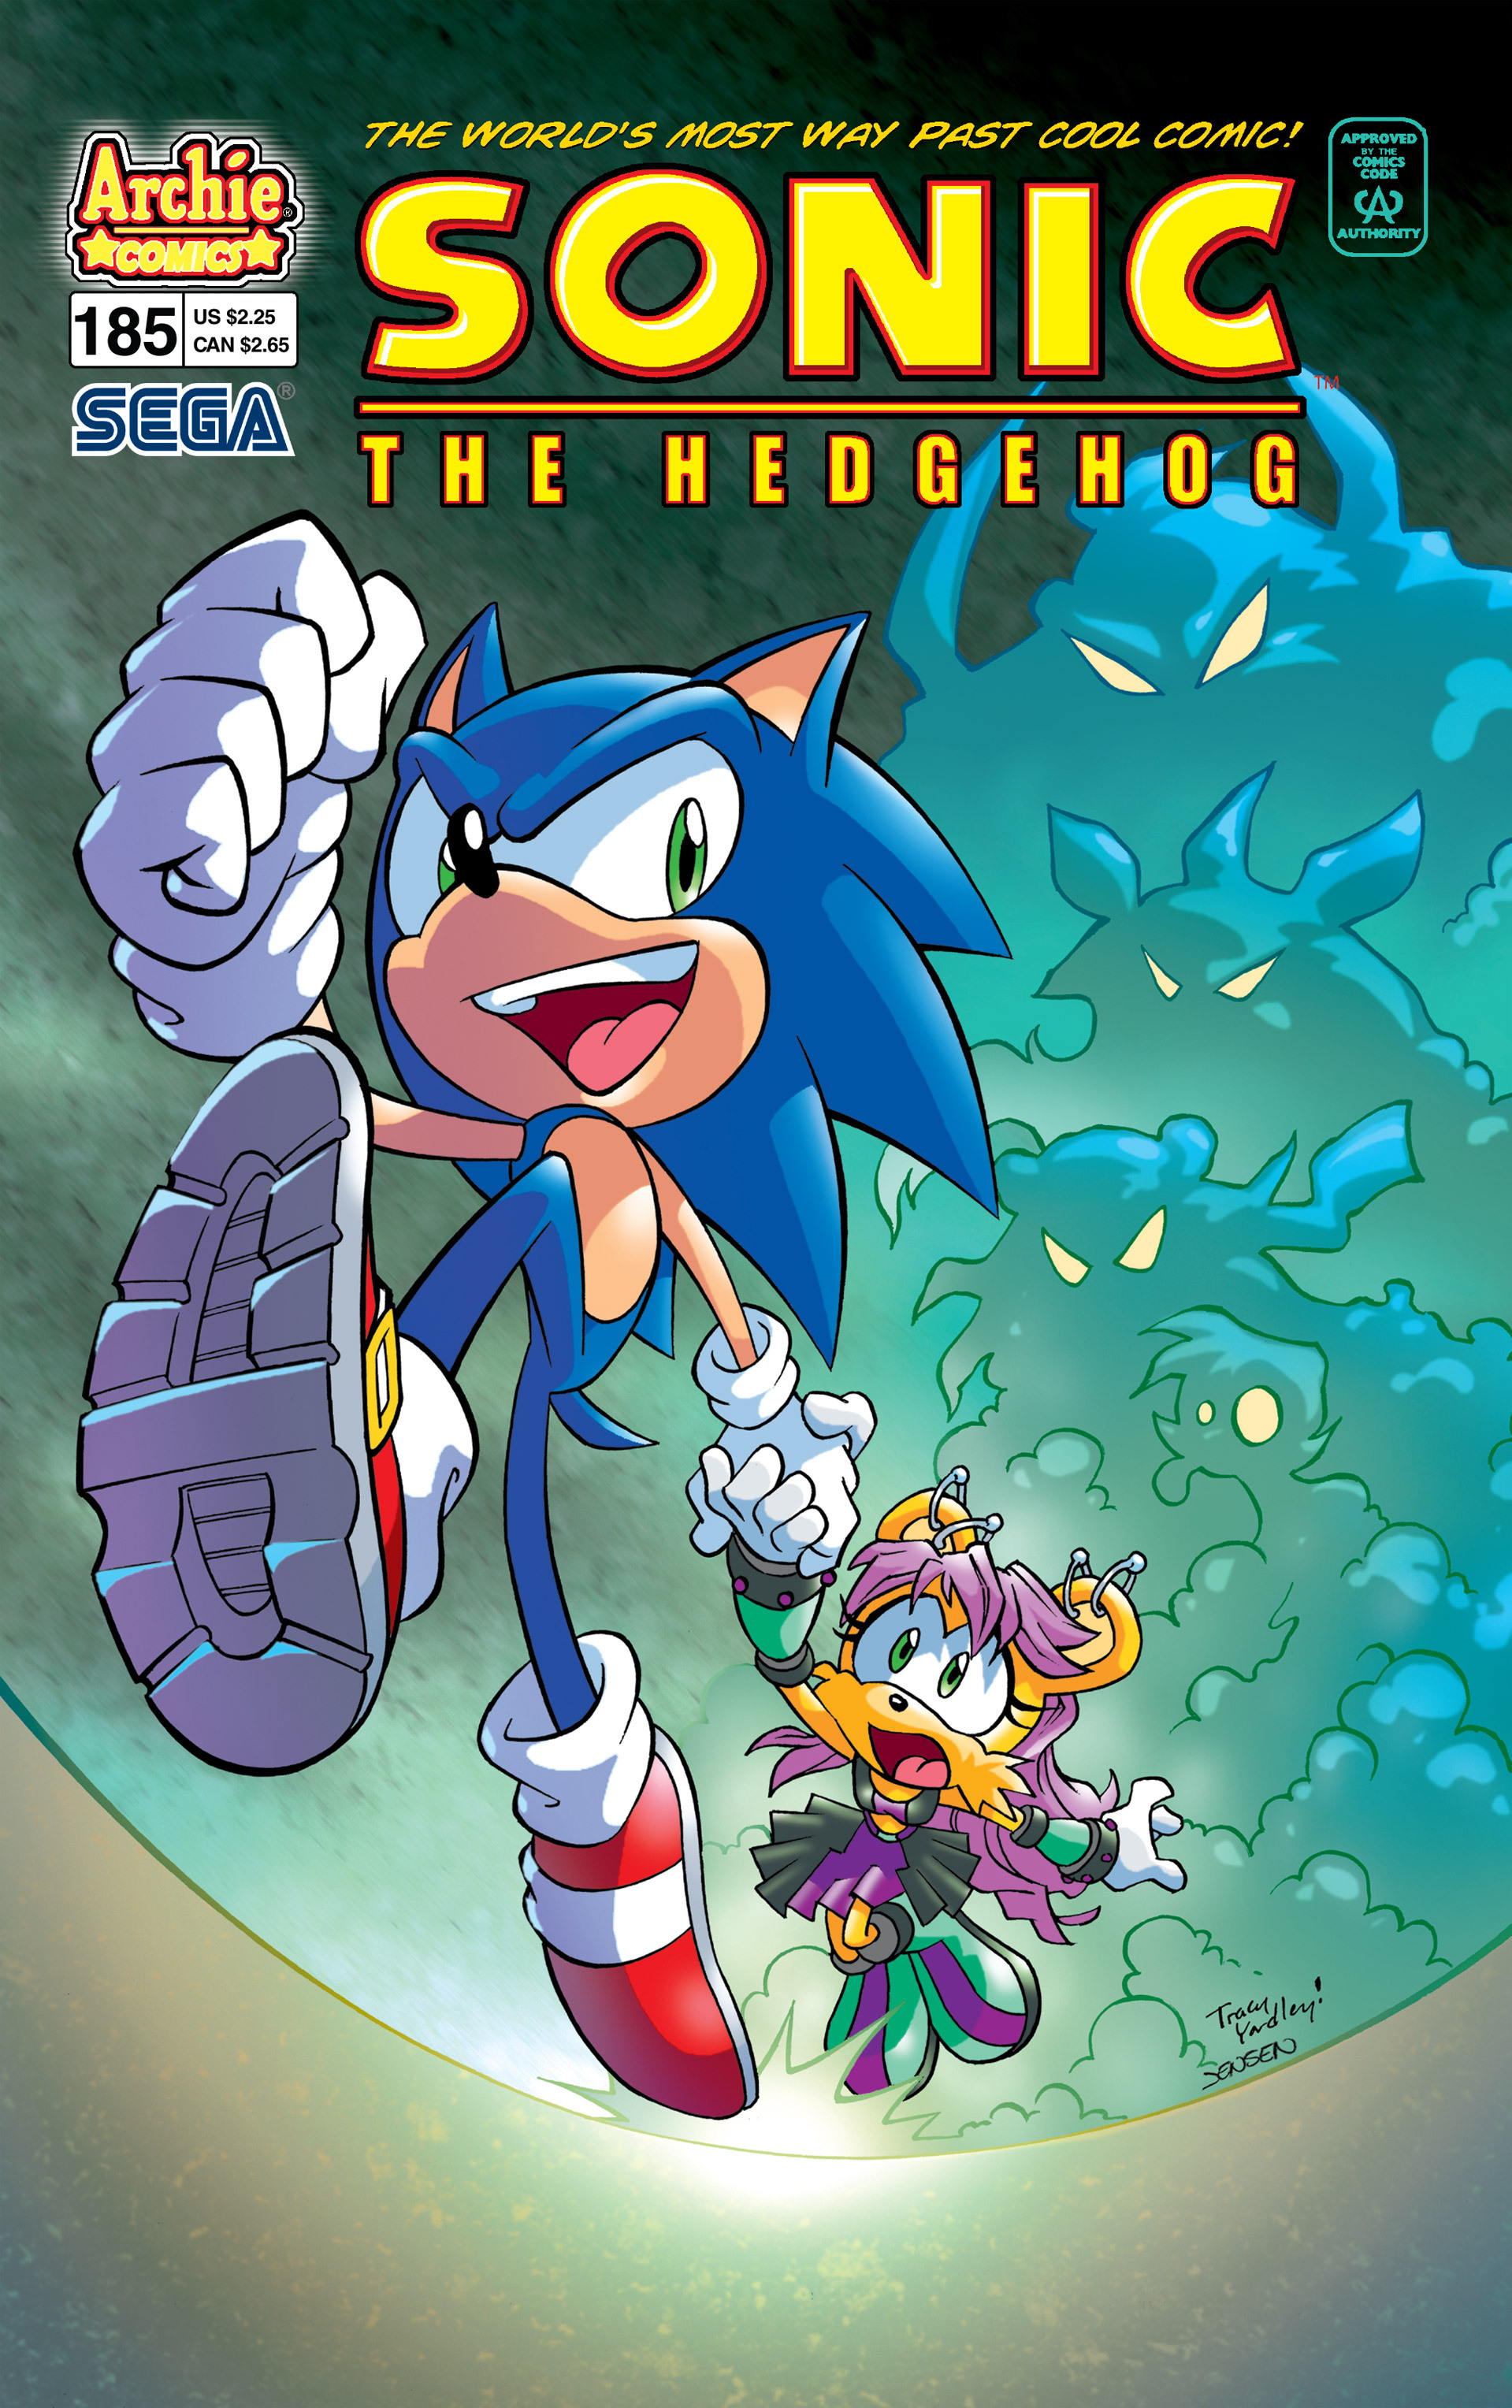 Archie Sonic the Hedgehog Issue 209 | Sonic News Network 